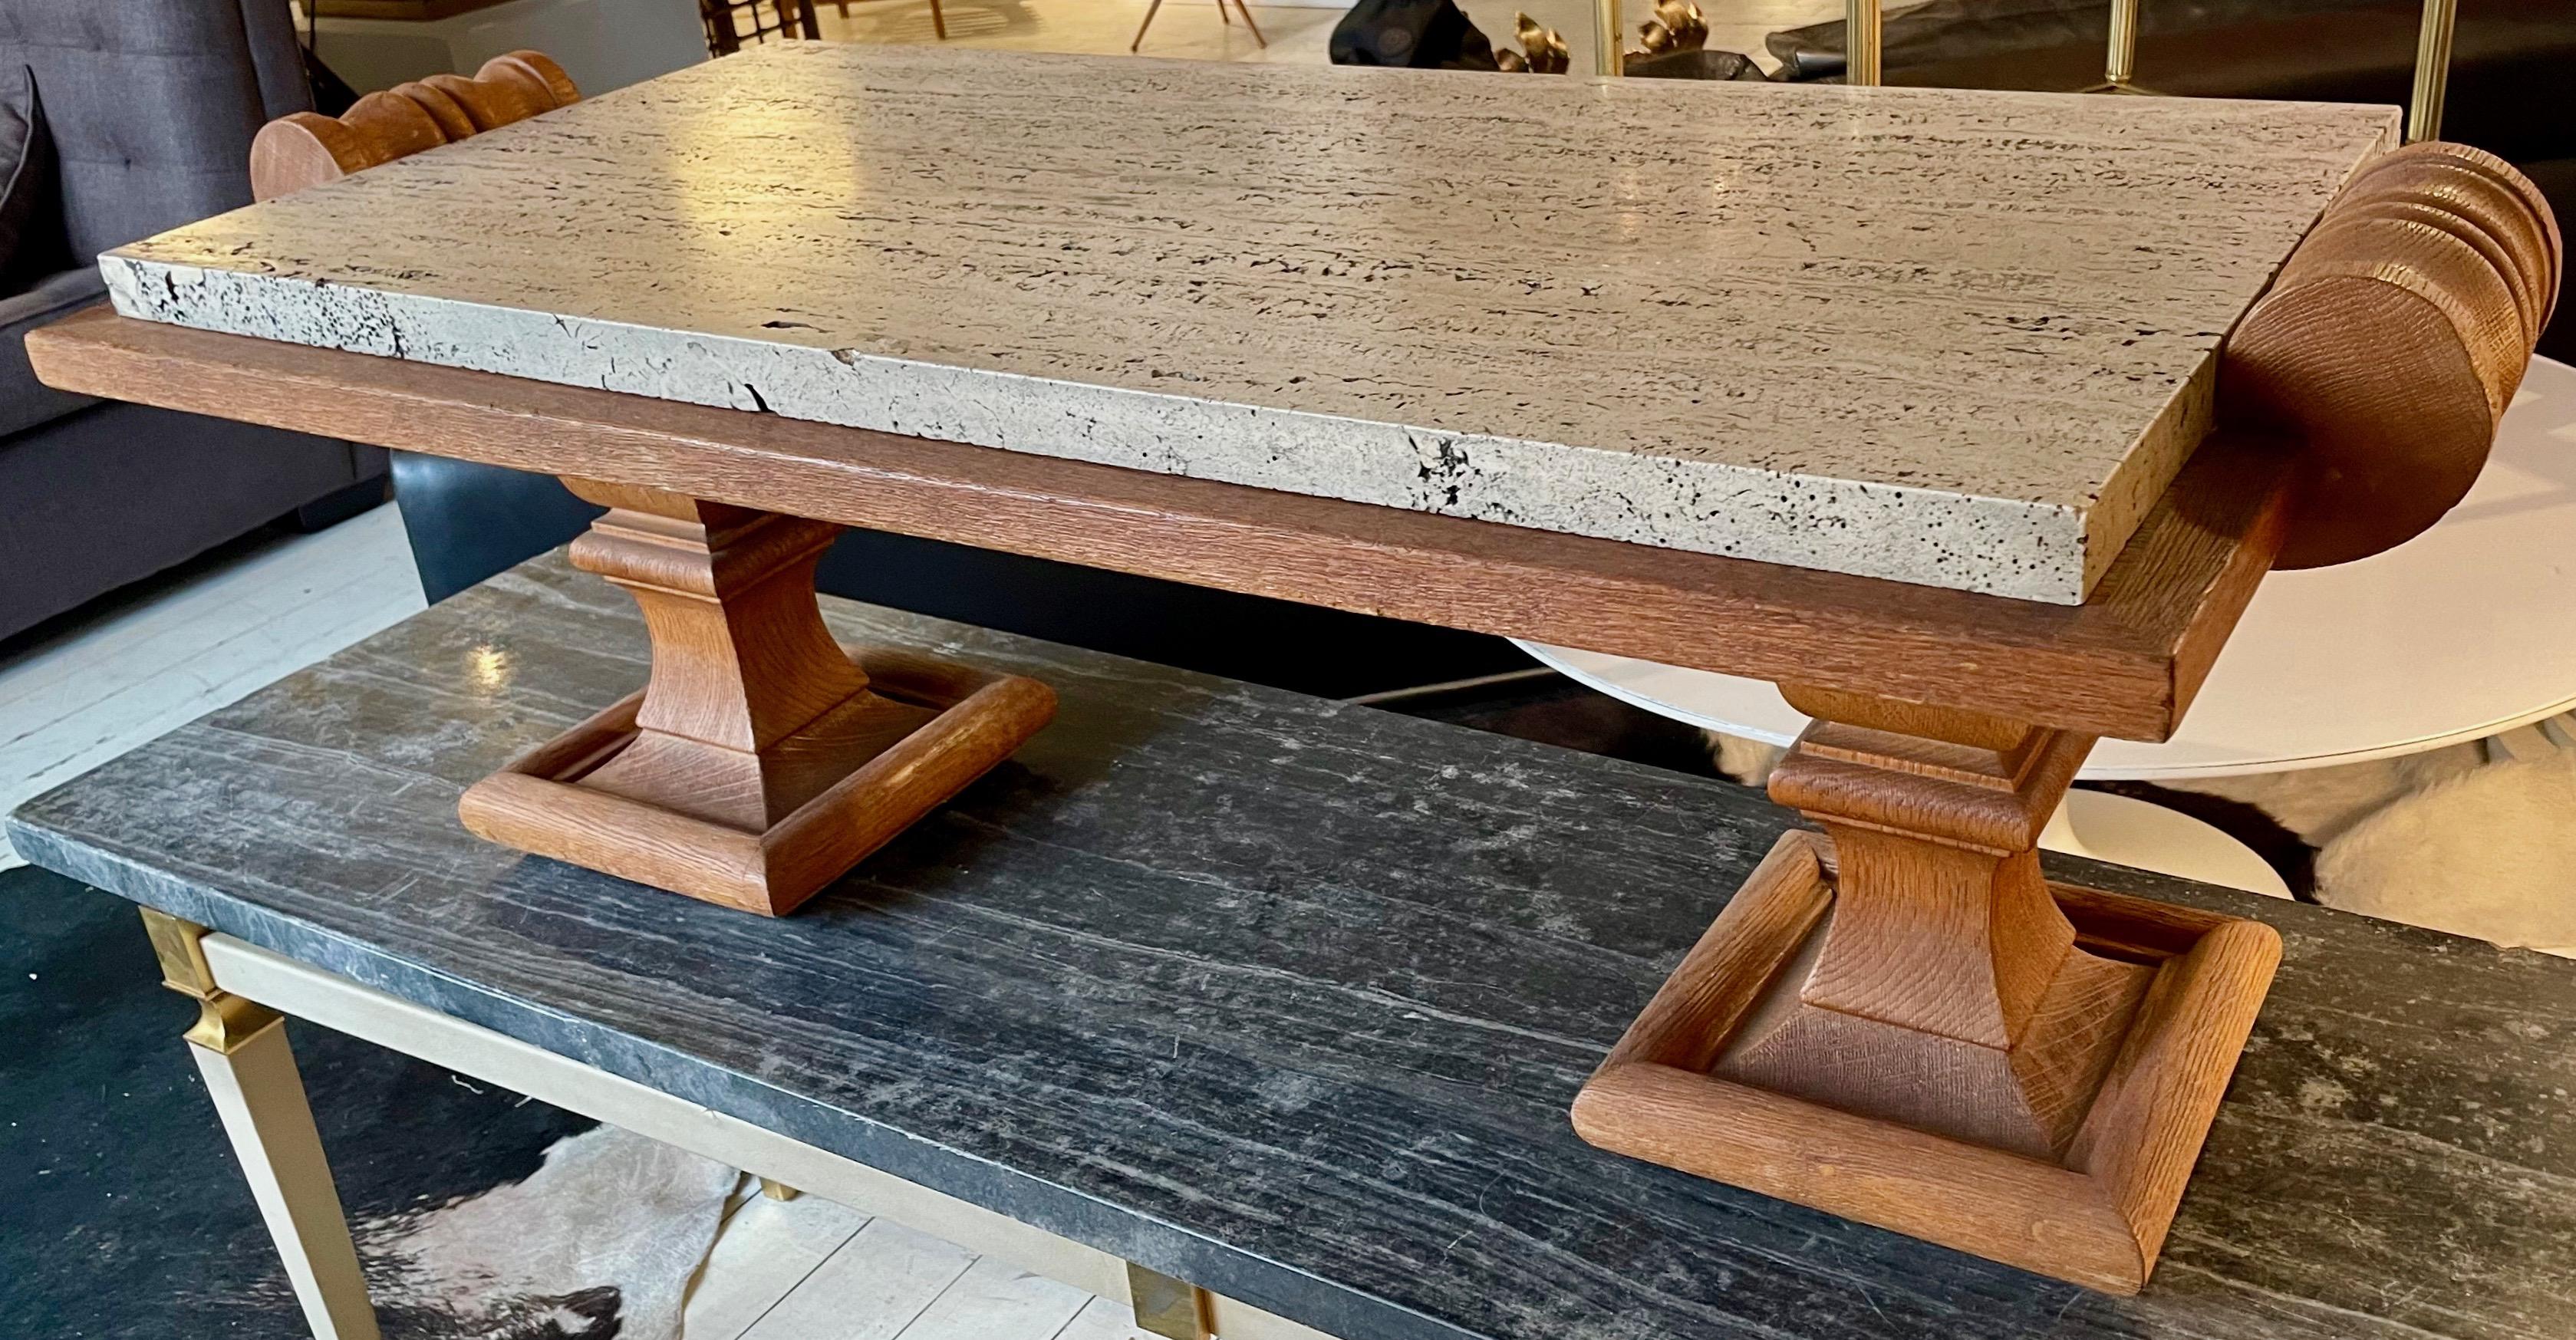 Massive and veneer sanded oak neoclassical table with a thick travertine top.
Litt: a very close model illustrated in 